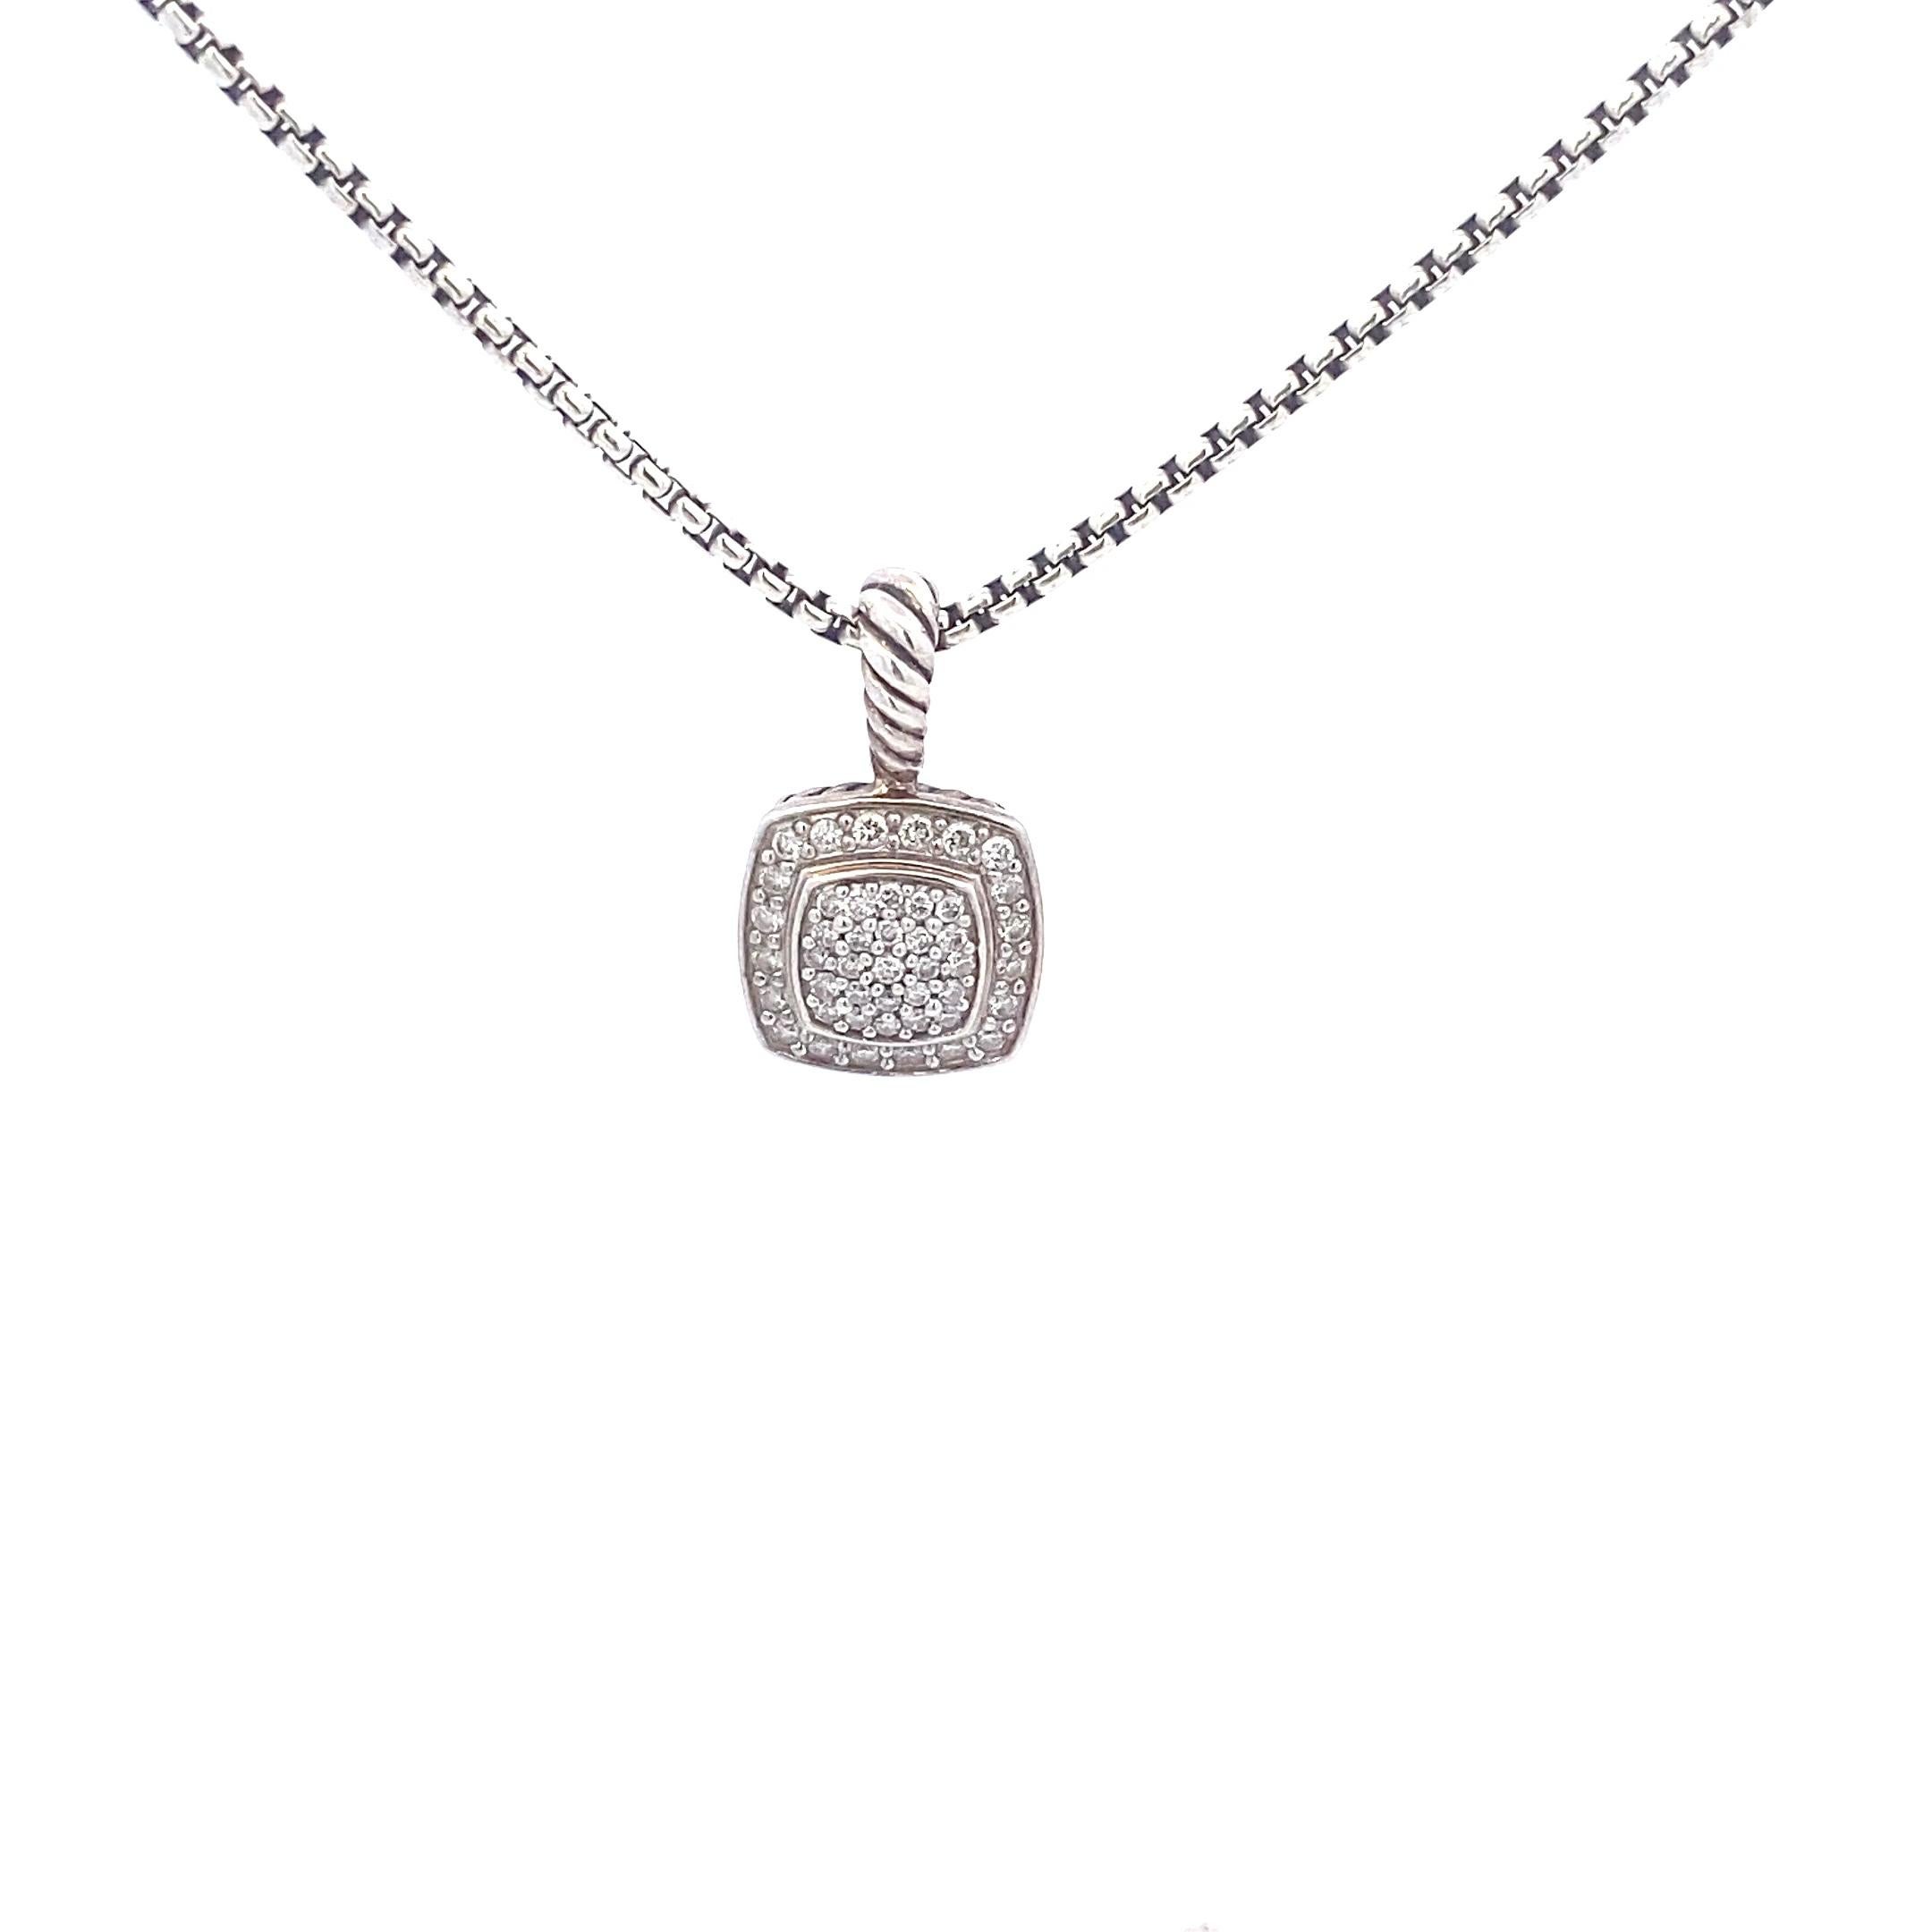 Introducing a gently-preowned classic David Yurman  Petite Albion® Pendant Necklace in Sterling Silver with Pavé Diamonds. Still available on the David Yurman website for MSRP $995, this modern design features 0.38 carat total weight of pave-set